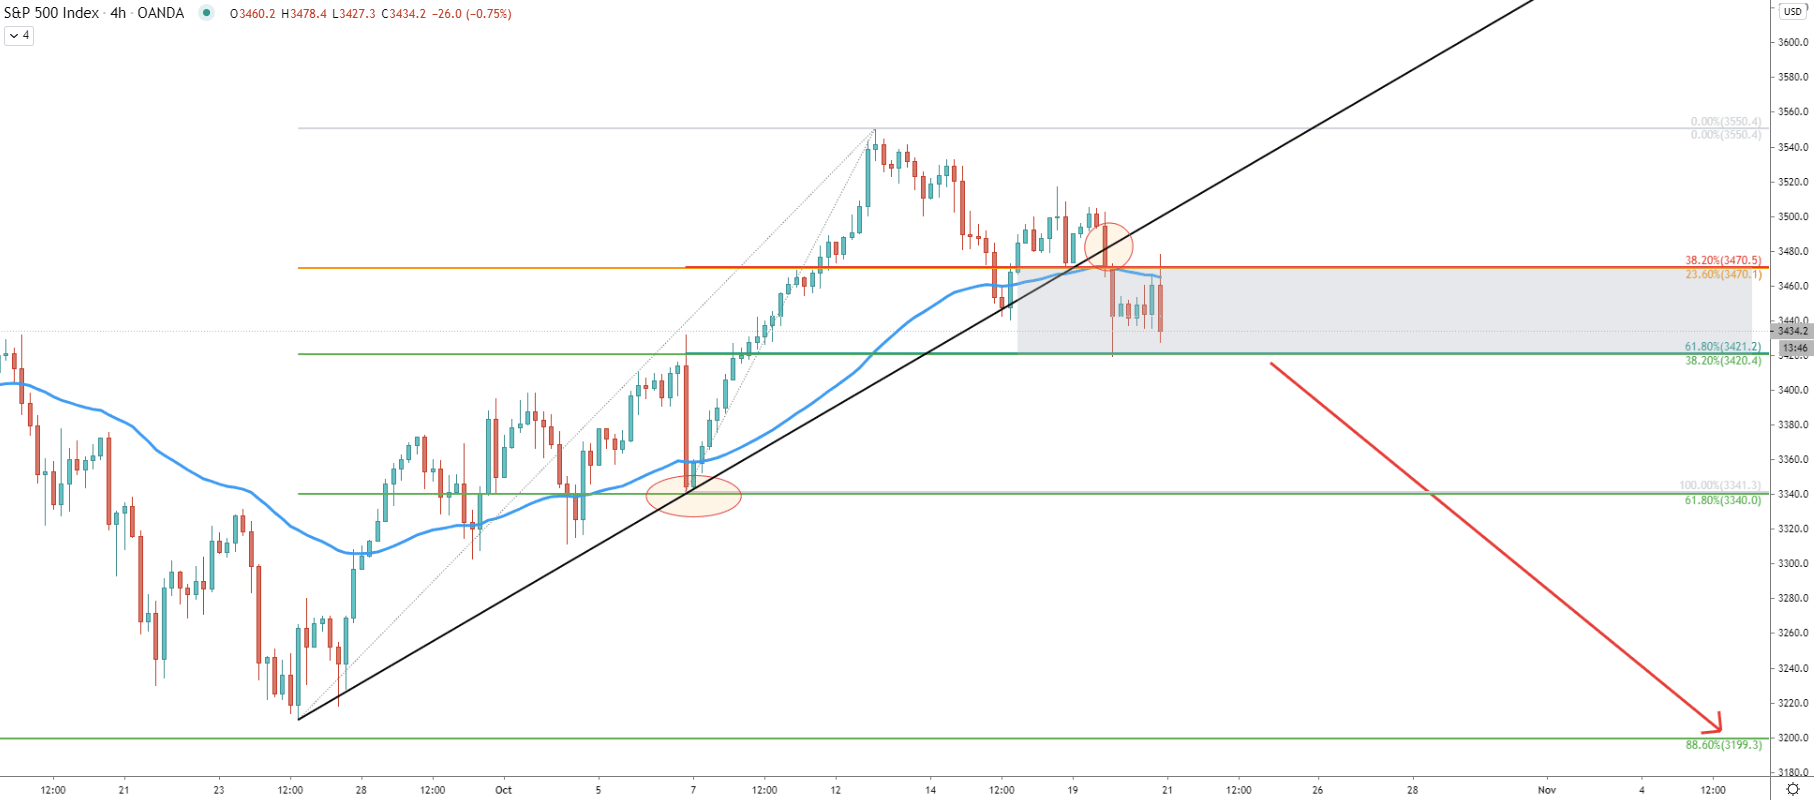 S&P500 4-Hour Technical Analysis 20 Oct 2020